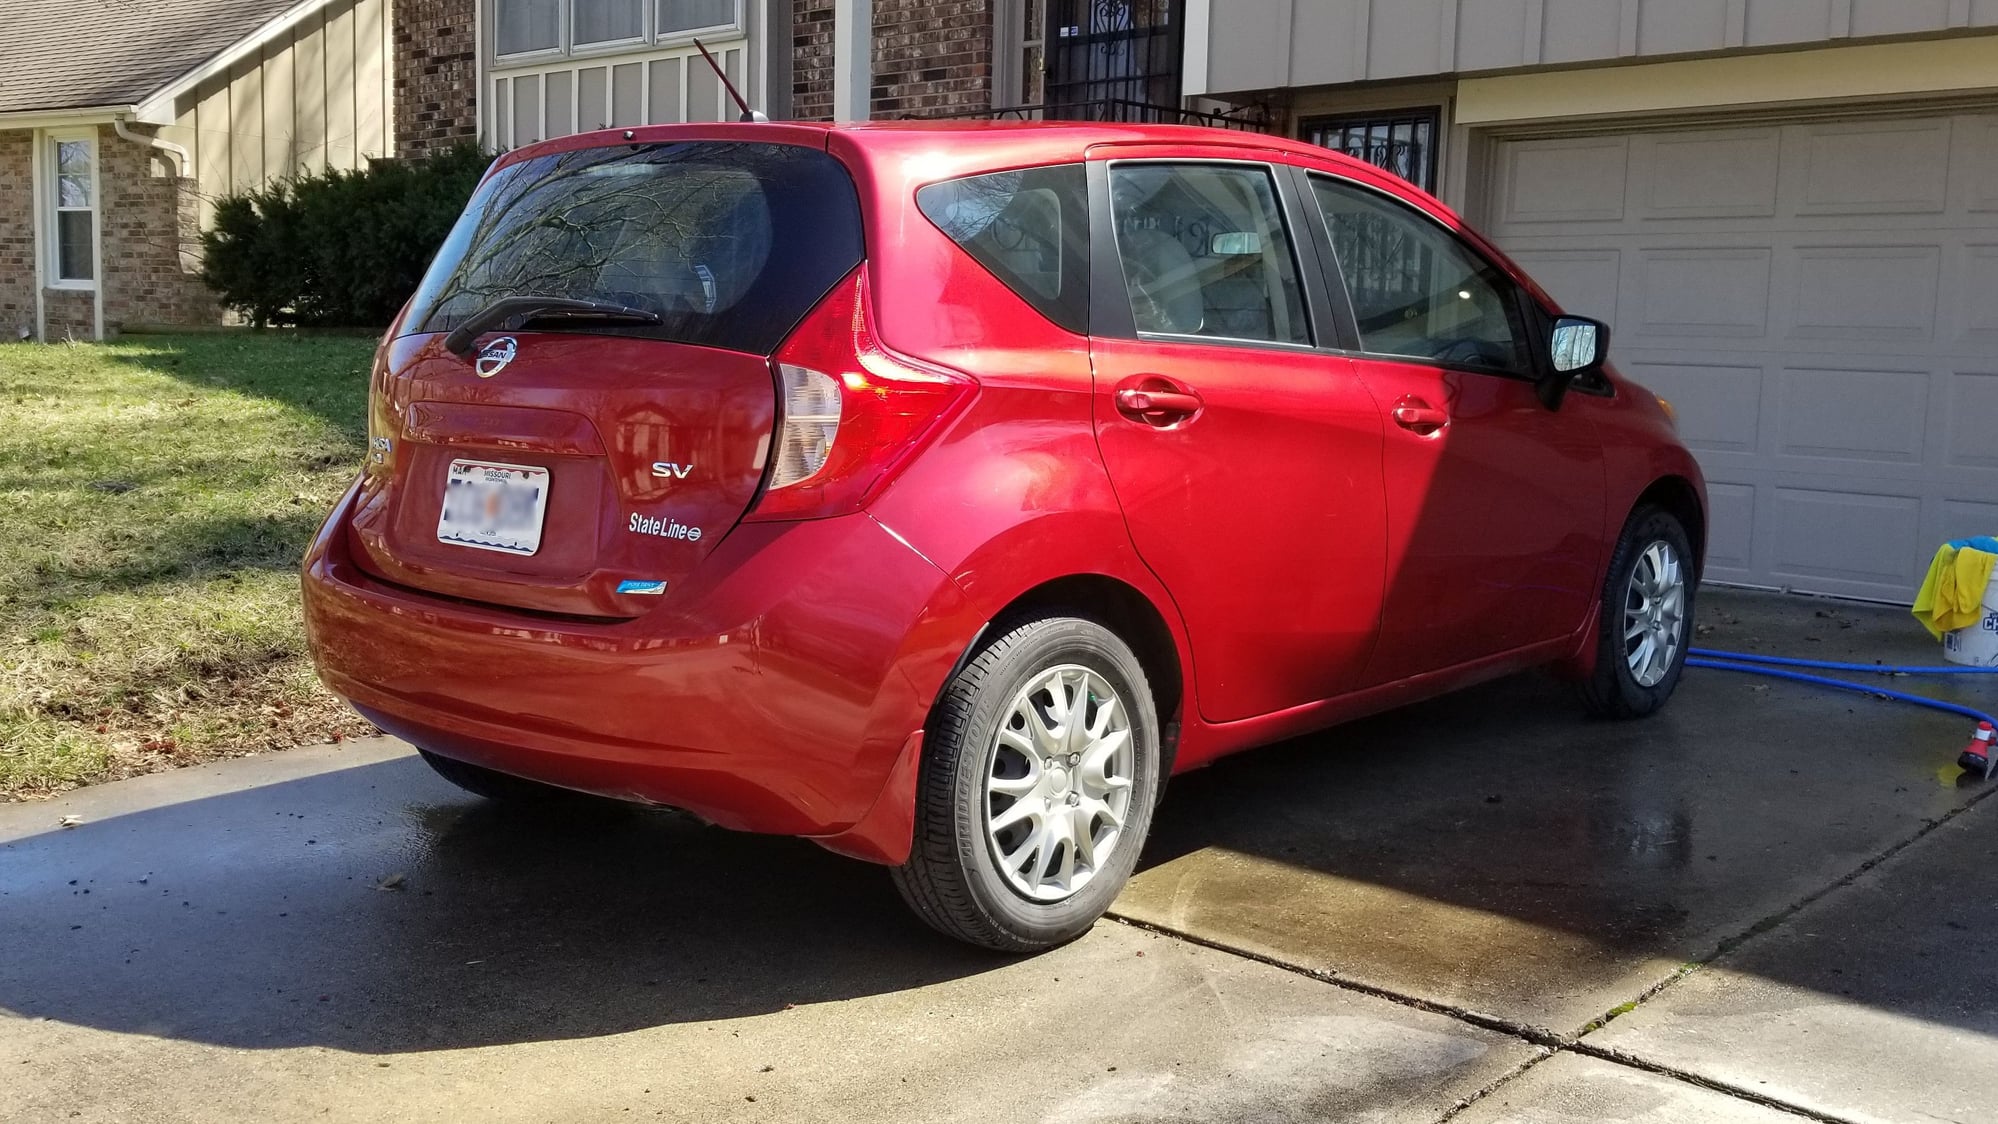 Nissan Versa Note Comes To LA With New Looks – News – Car and Driver